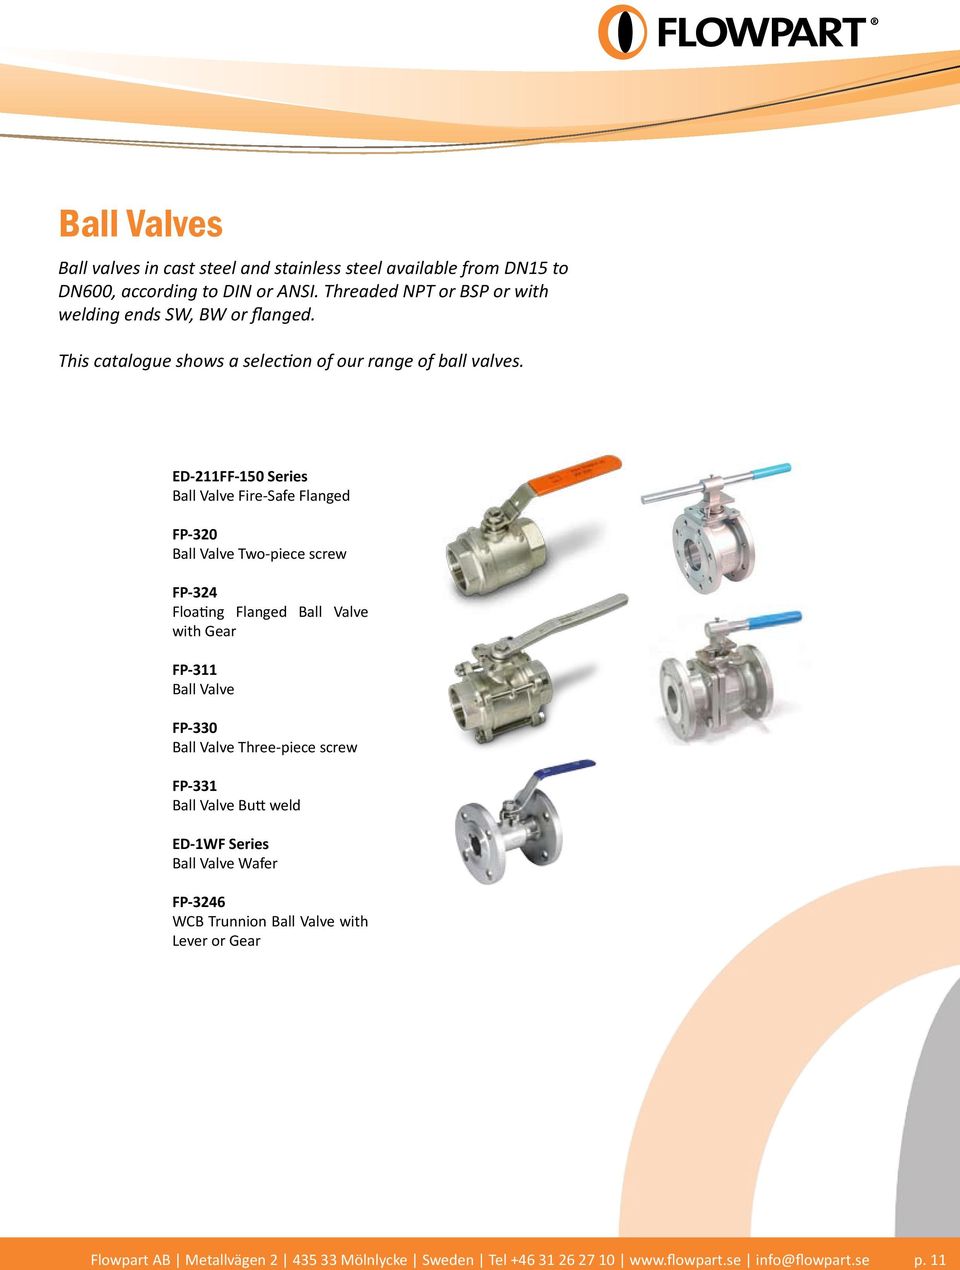 ED-211FF-150 Series Ball Valve Fire-Safe Flanged FP-320 Ball Valve Two-piece screw FP-324 Floating Flanged Ball Valve with Gear FP-311 Ball Valve FP-330 Ball